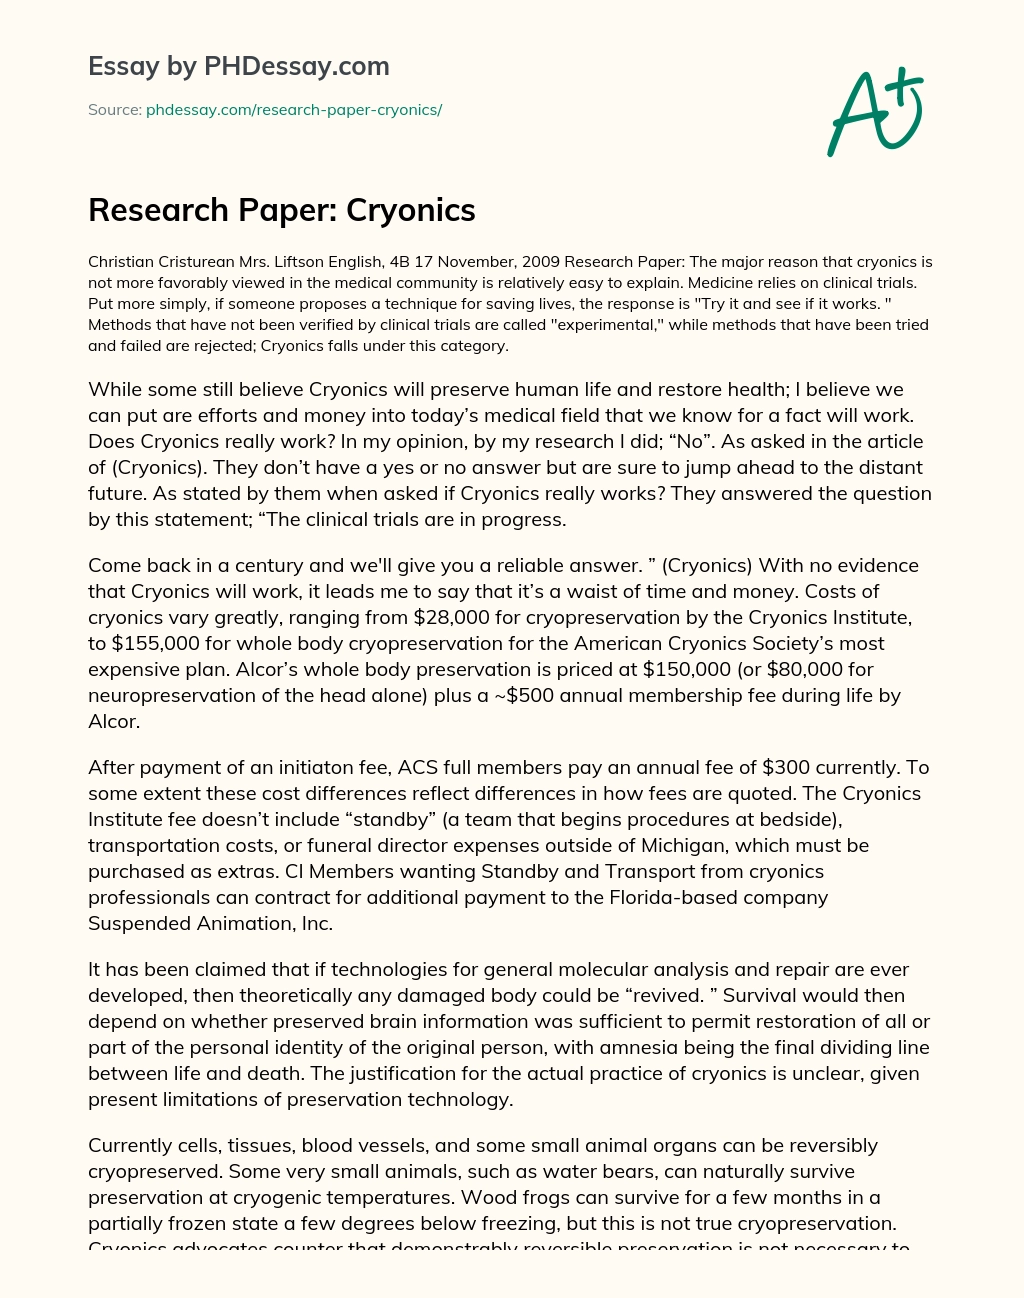 Research Paper: Cryonics essay